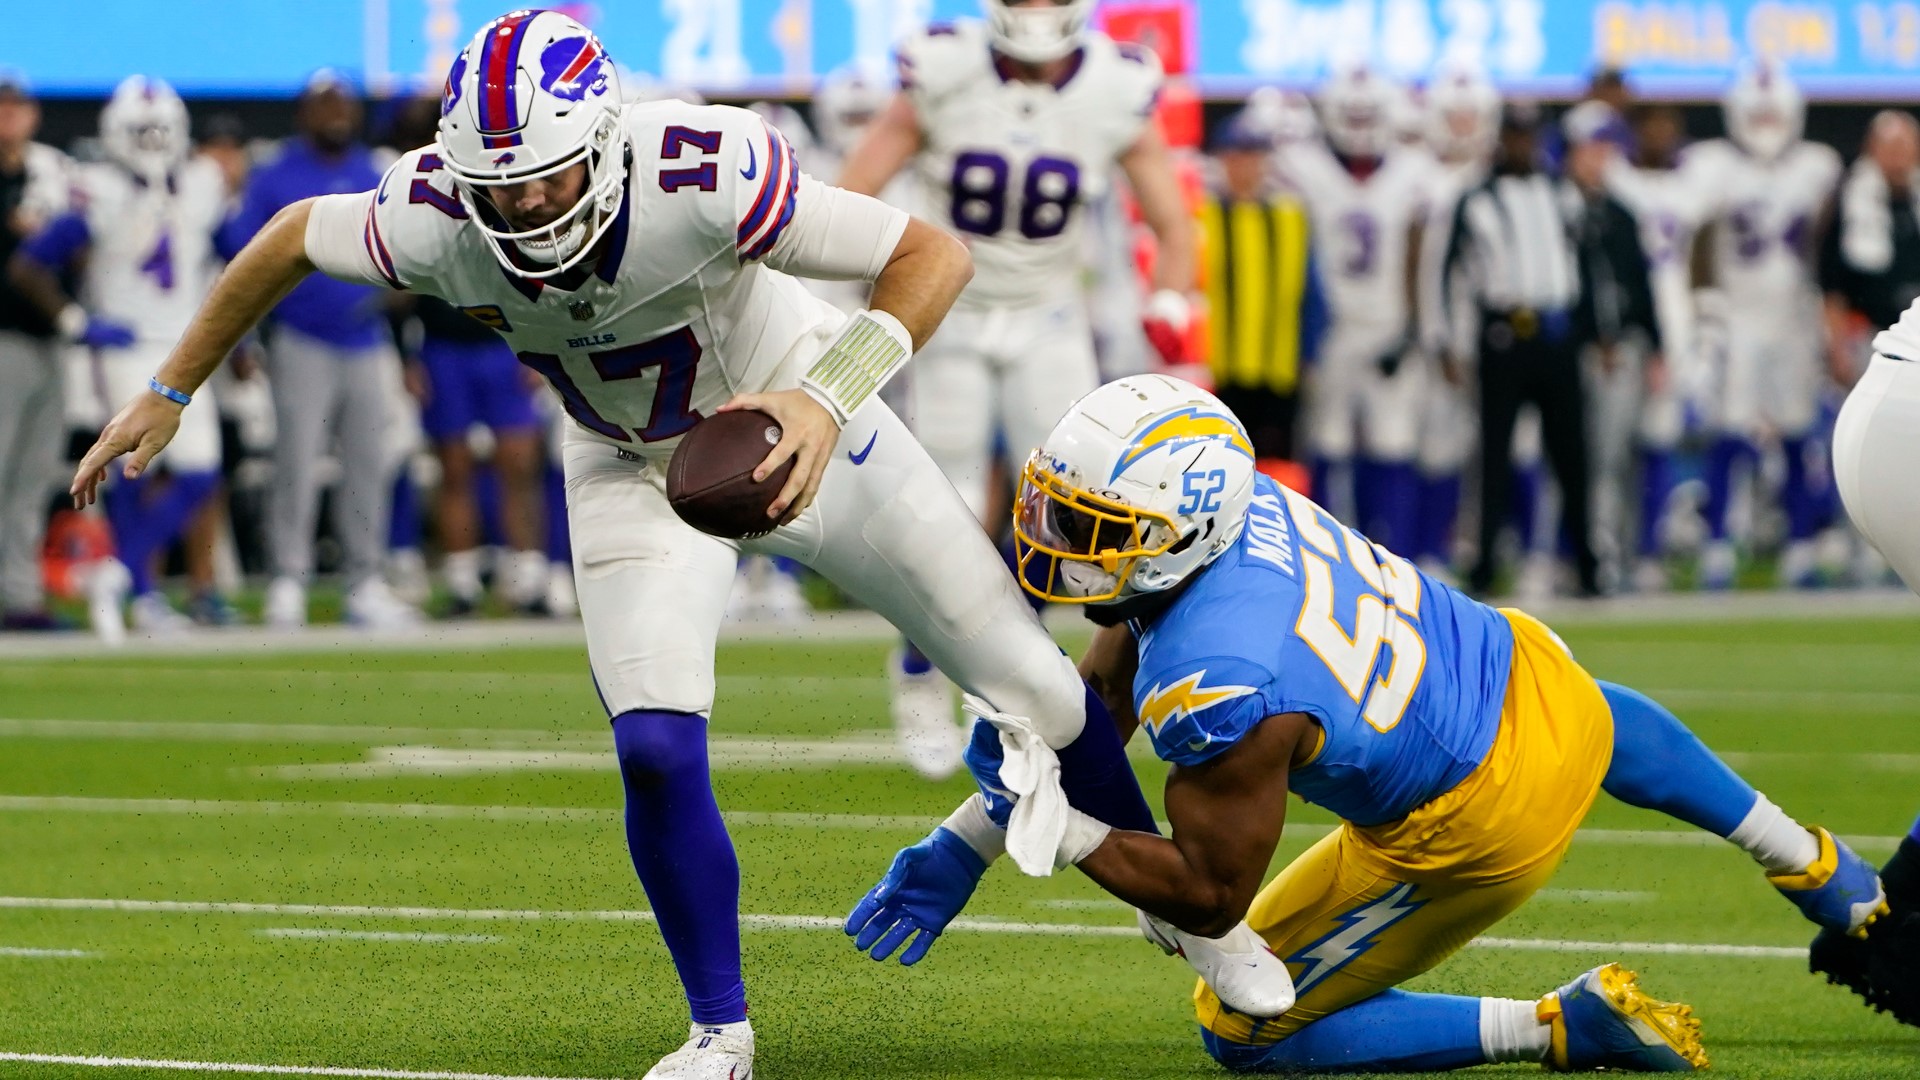 Jonathan Acosta and Vic Carucci preview Week 17 as the Bills look to take down the Patriots